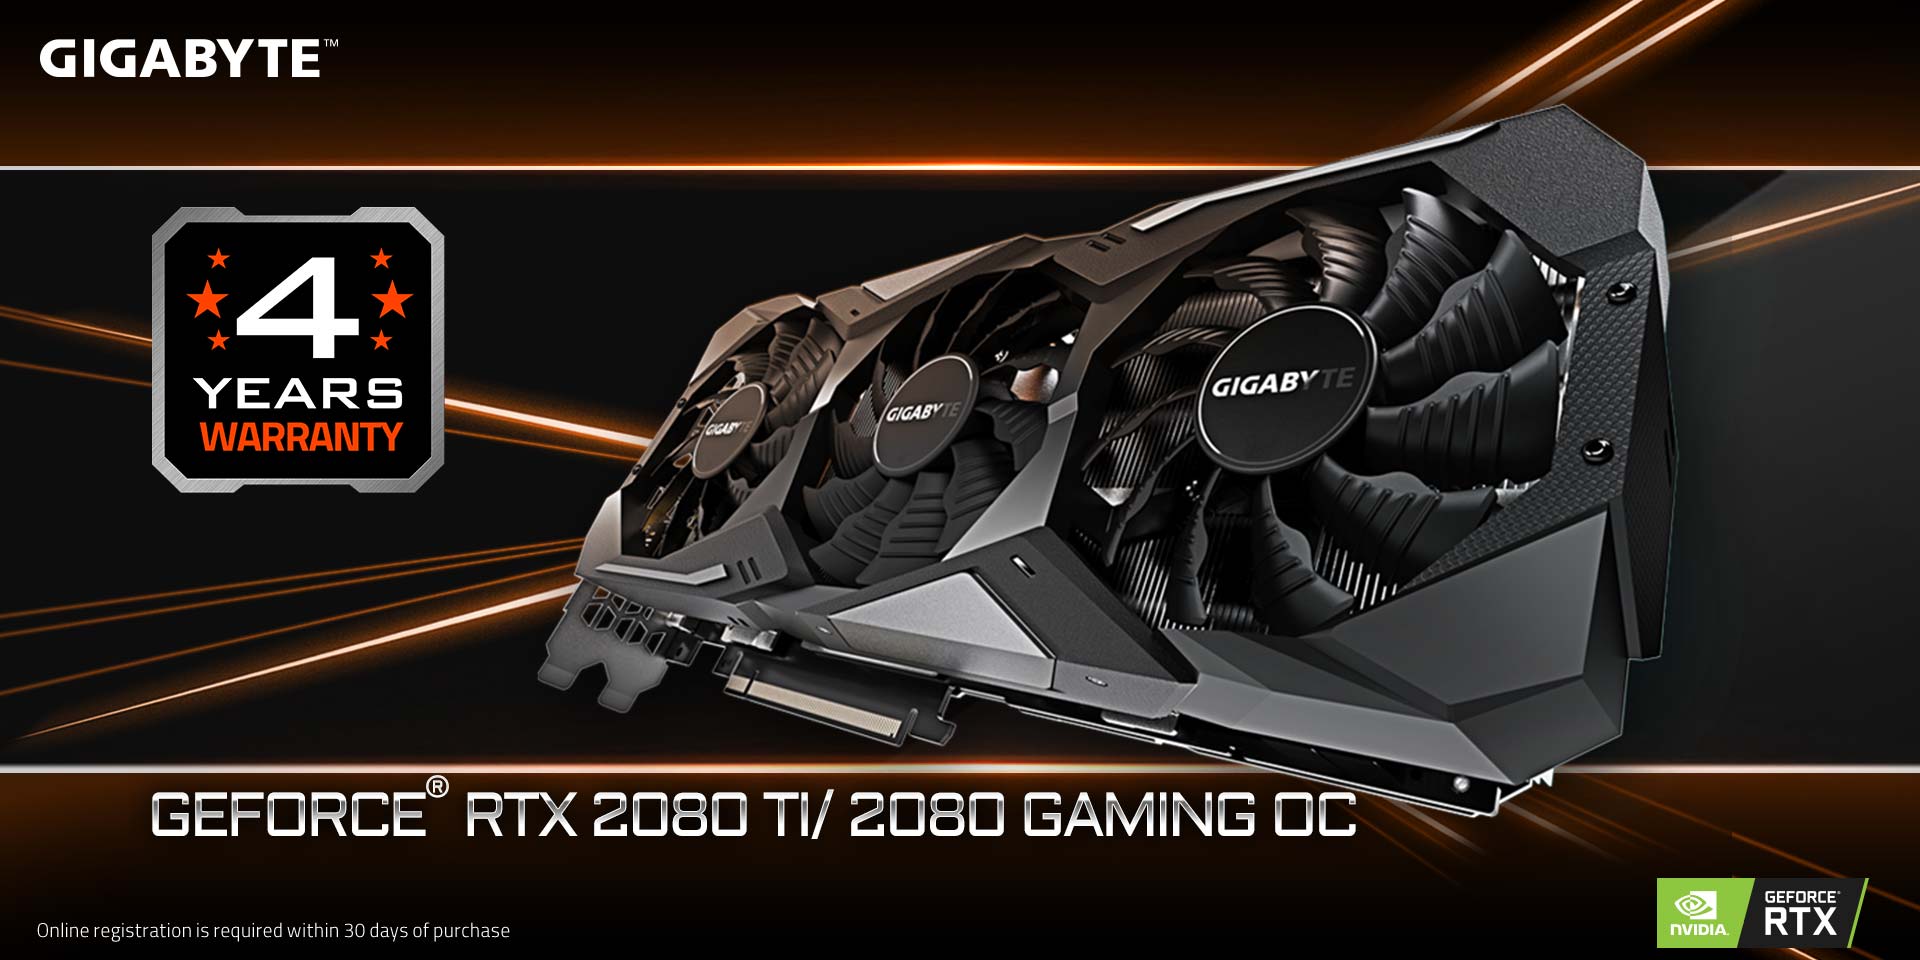 Get 4 Years Warranty for Your GIGABYTE RTX 2080Ti, 2070 Graphics Card